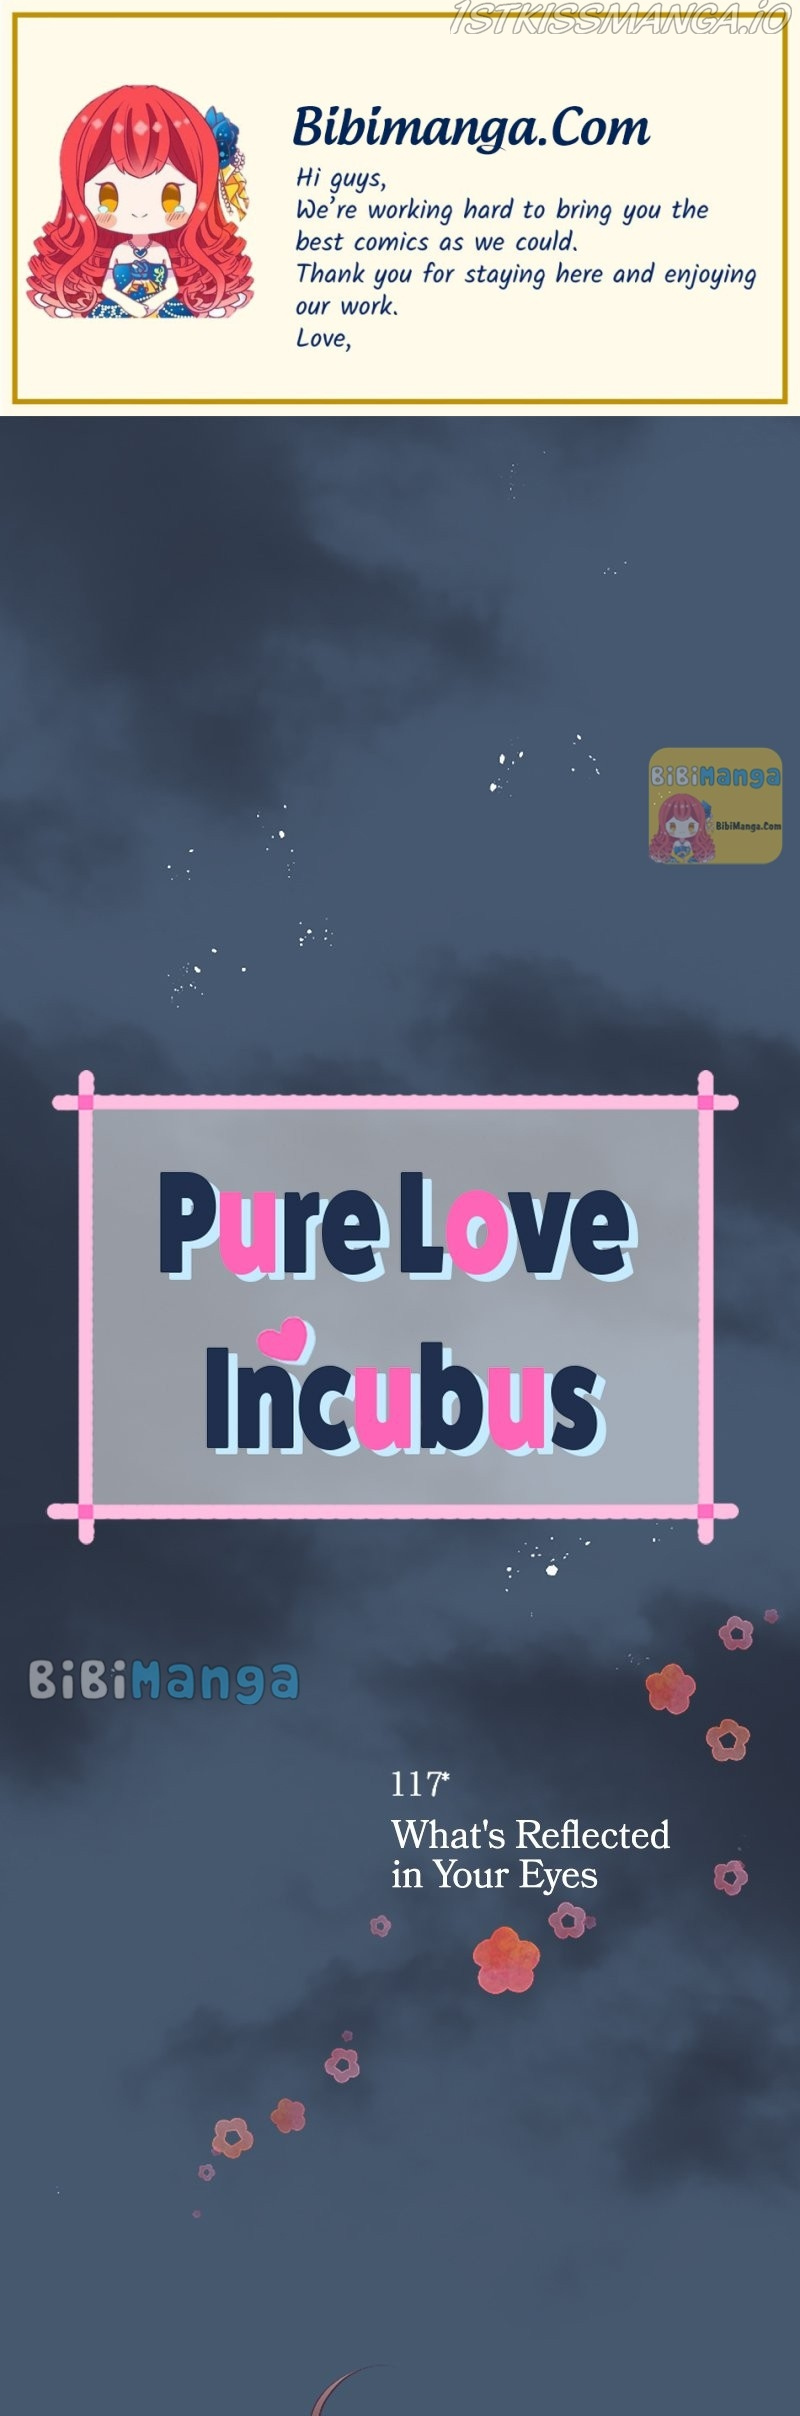 Pure Love Incubus - Page 1